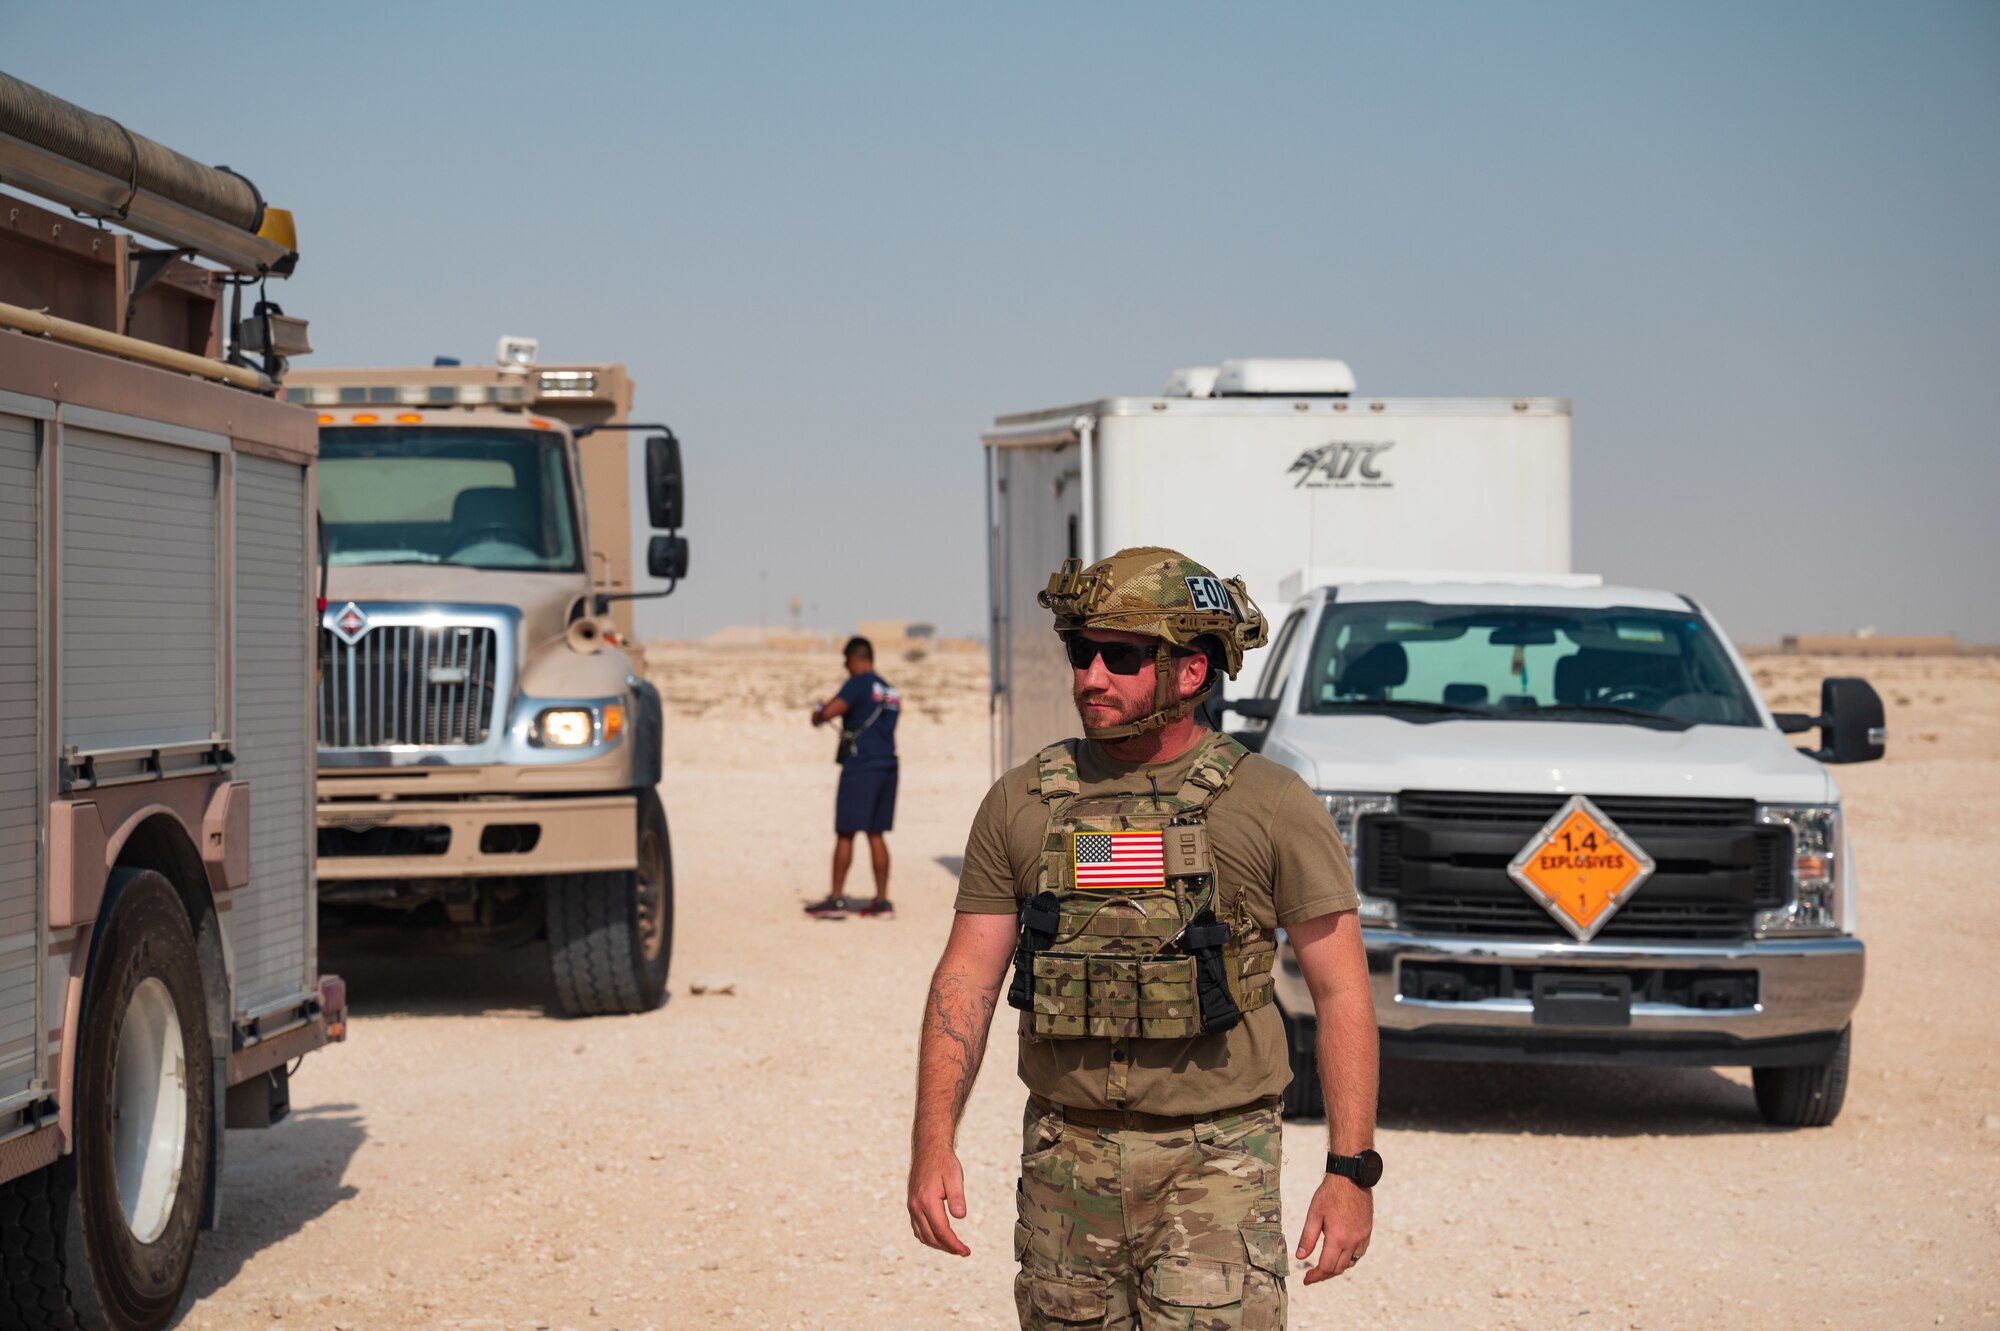 U.S. Air Force Staff Sgt. Cory Lessard, an Explosive Ordnance Disposal technician from the 379th Expeditionary Civil Engineer Squadron, arrives on scene during an exercise Aug. 24, 2022 at Al Udeid Air Base, Qatar. Lessard cleared the area of all personnel to ensure a safe distance from the explosion site during the exercise. (U.S. Air Force photo by Staff Sgt. Dana Tourtellotte)